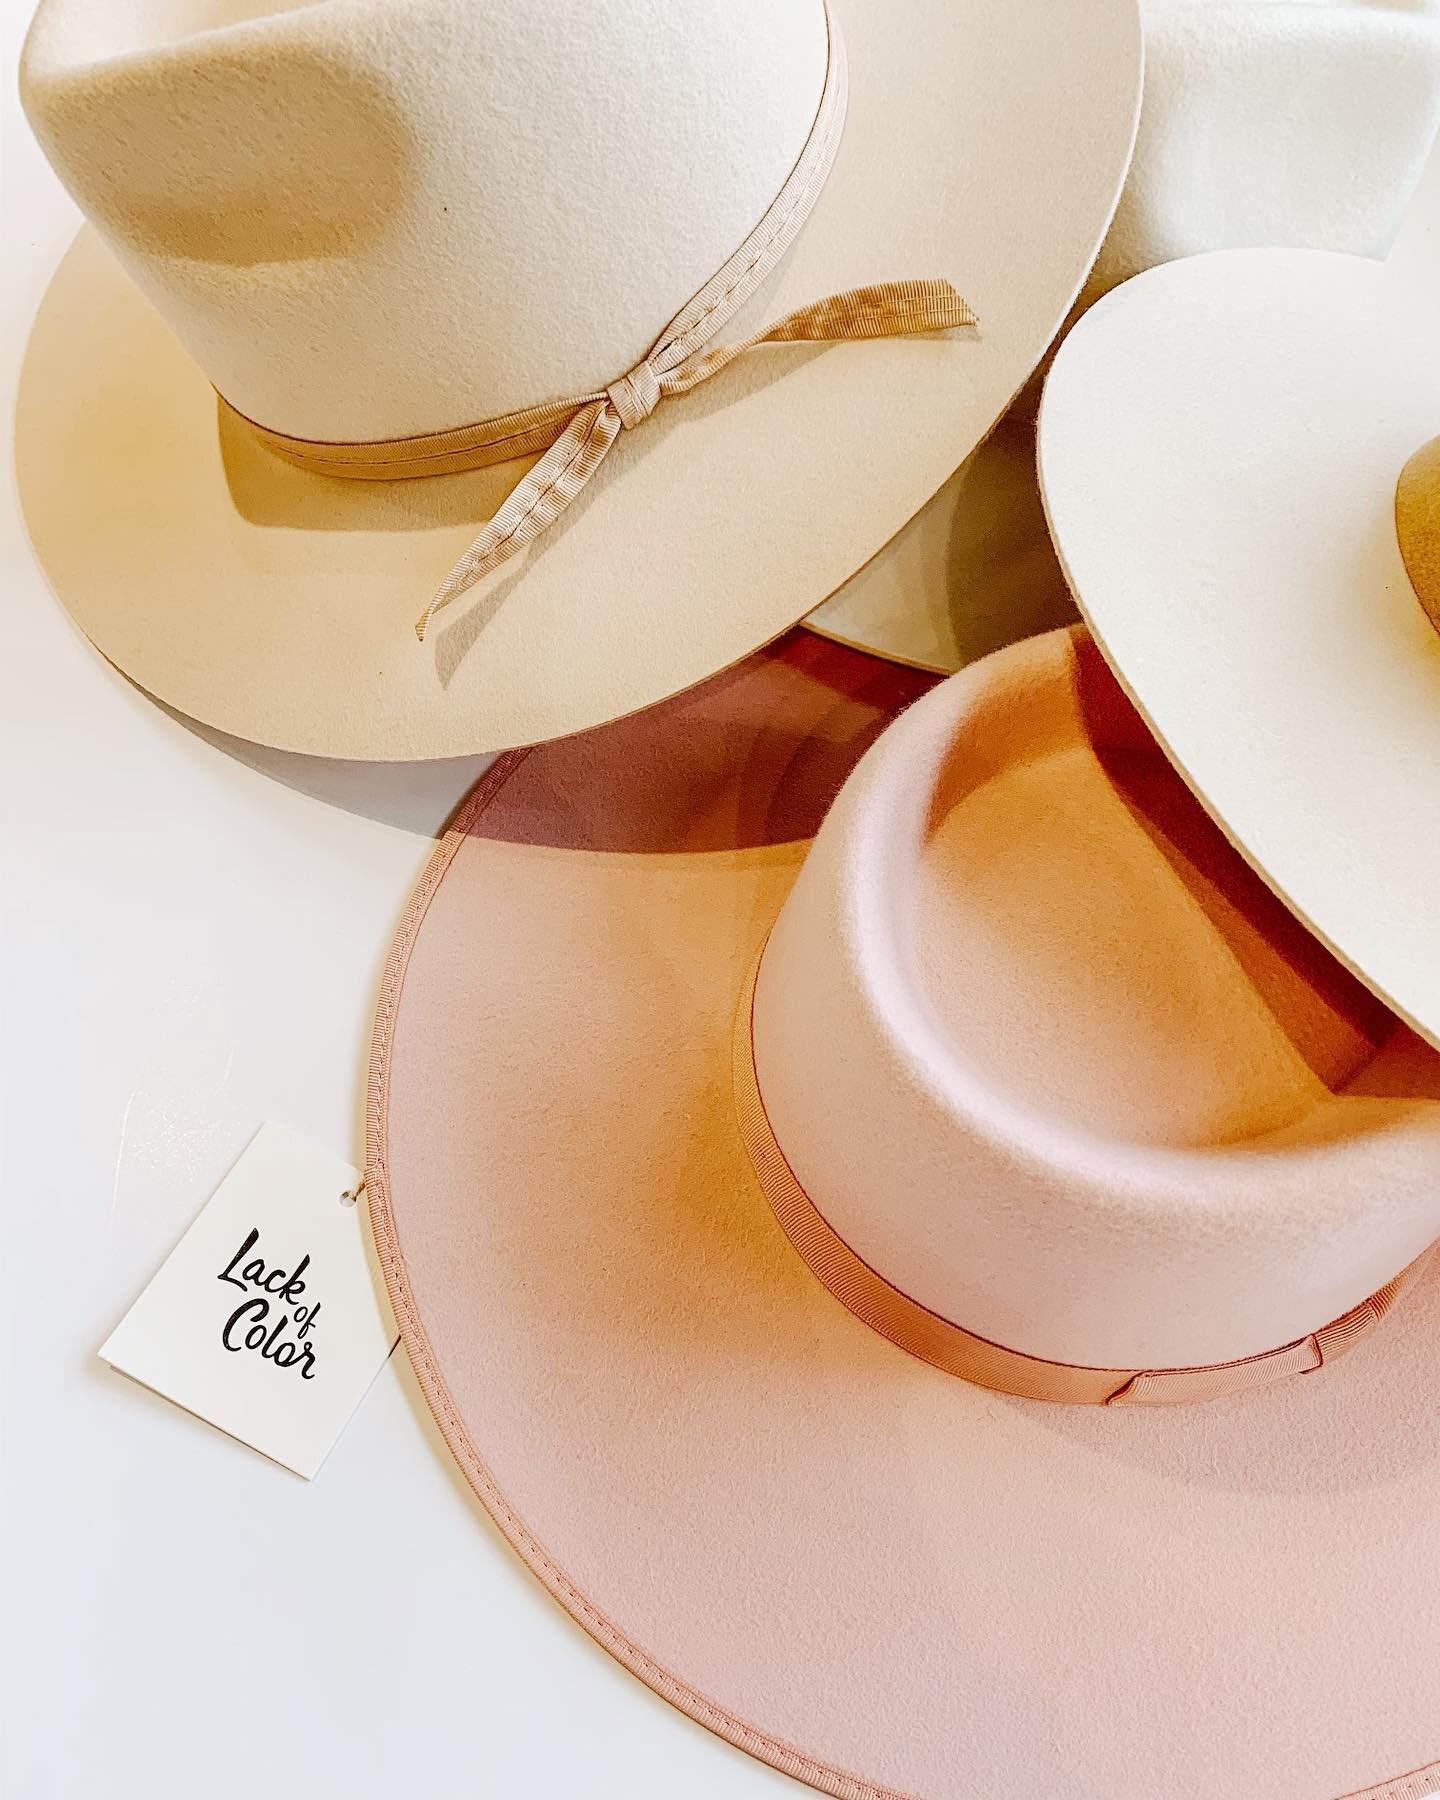 a fresh stack of hats to top off the week! restocked on all of our favorites! @lackofcoloraus 
.
#stacksonstacks #lackofcoloraus #hatsofftoyou #springfavorites #shoplocal